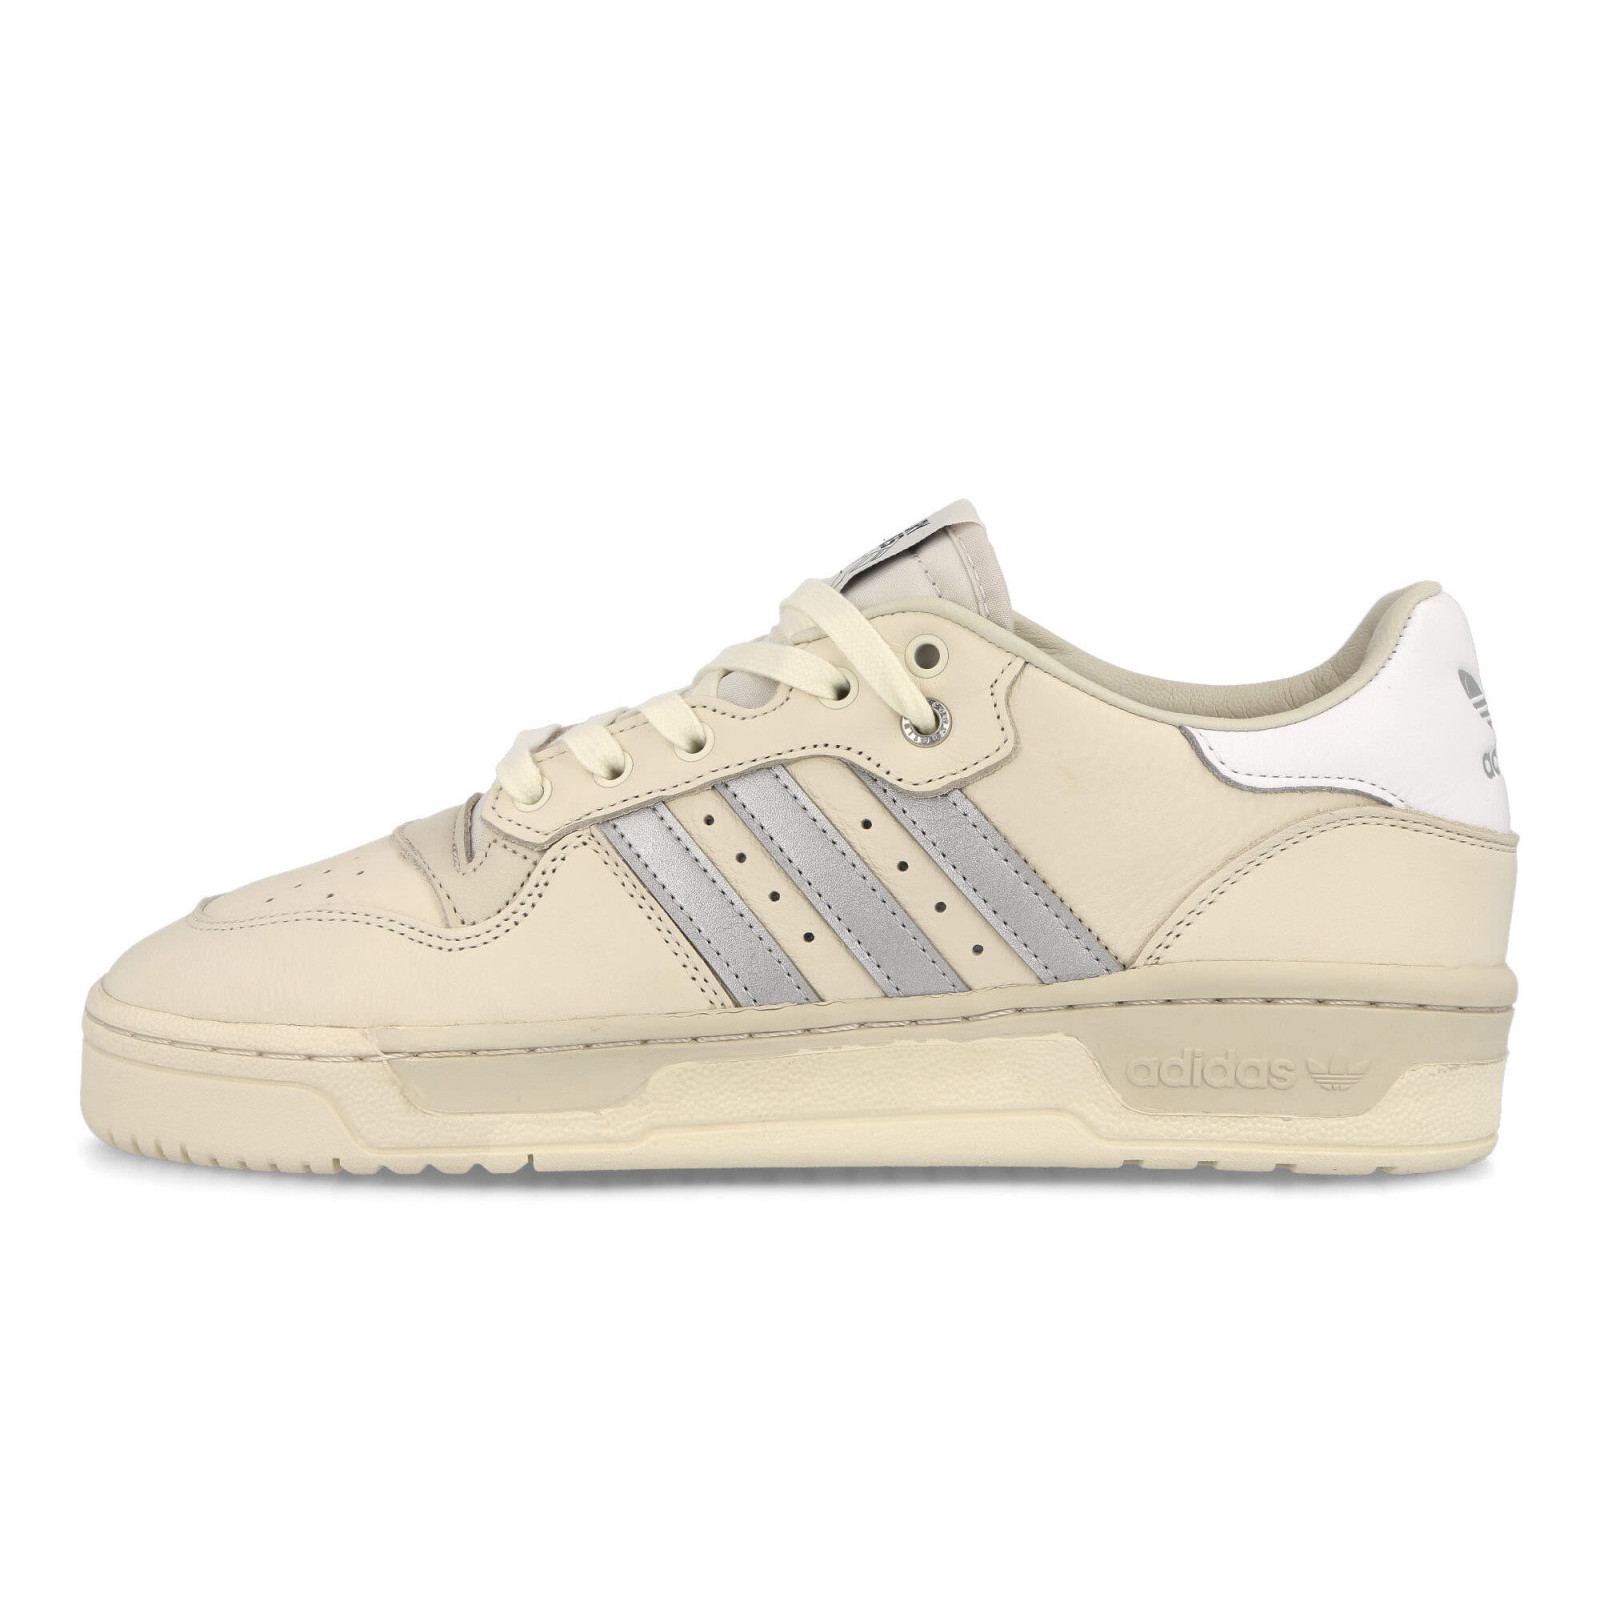 Adidas Rivalry Low Consortium
Clear White / Silver Metallic